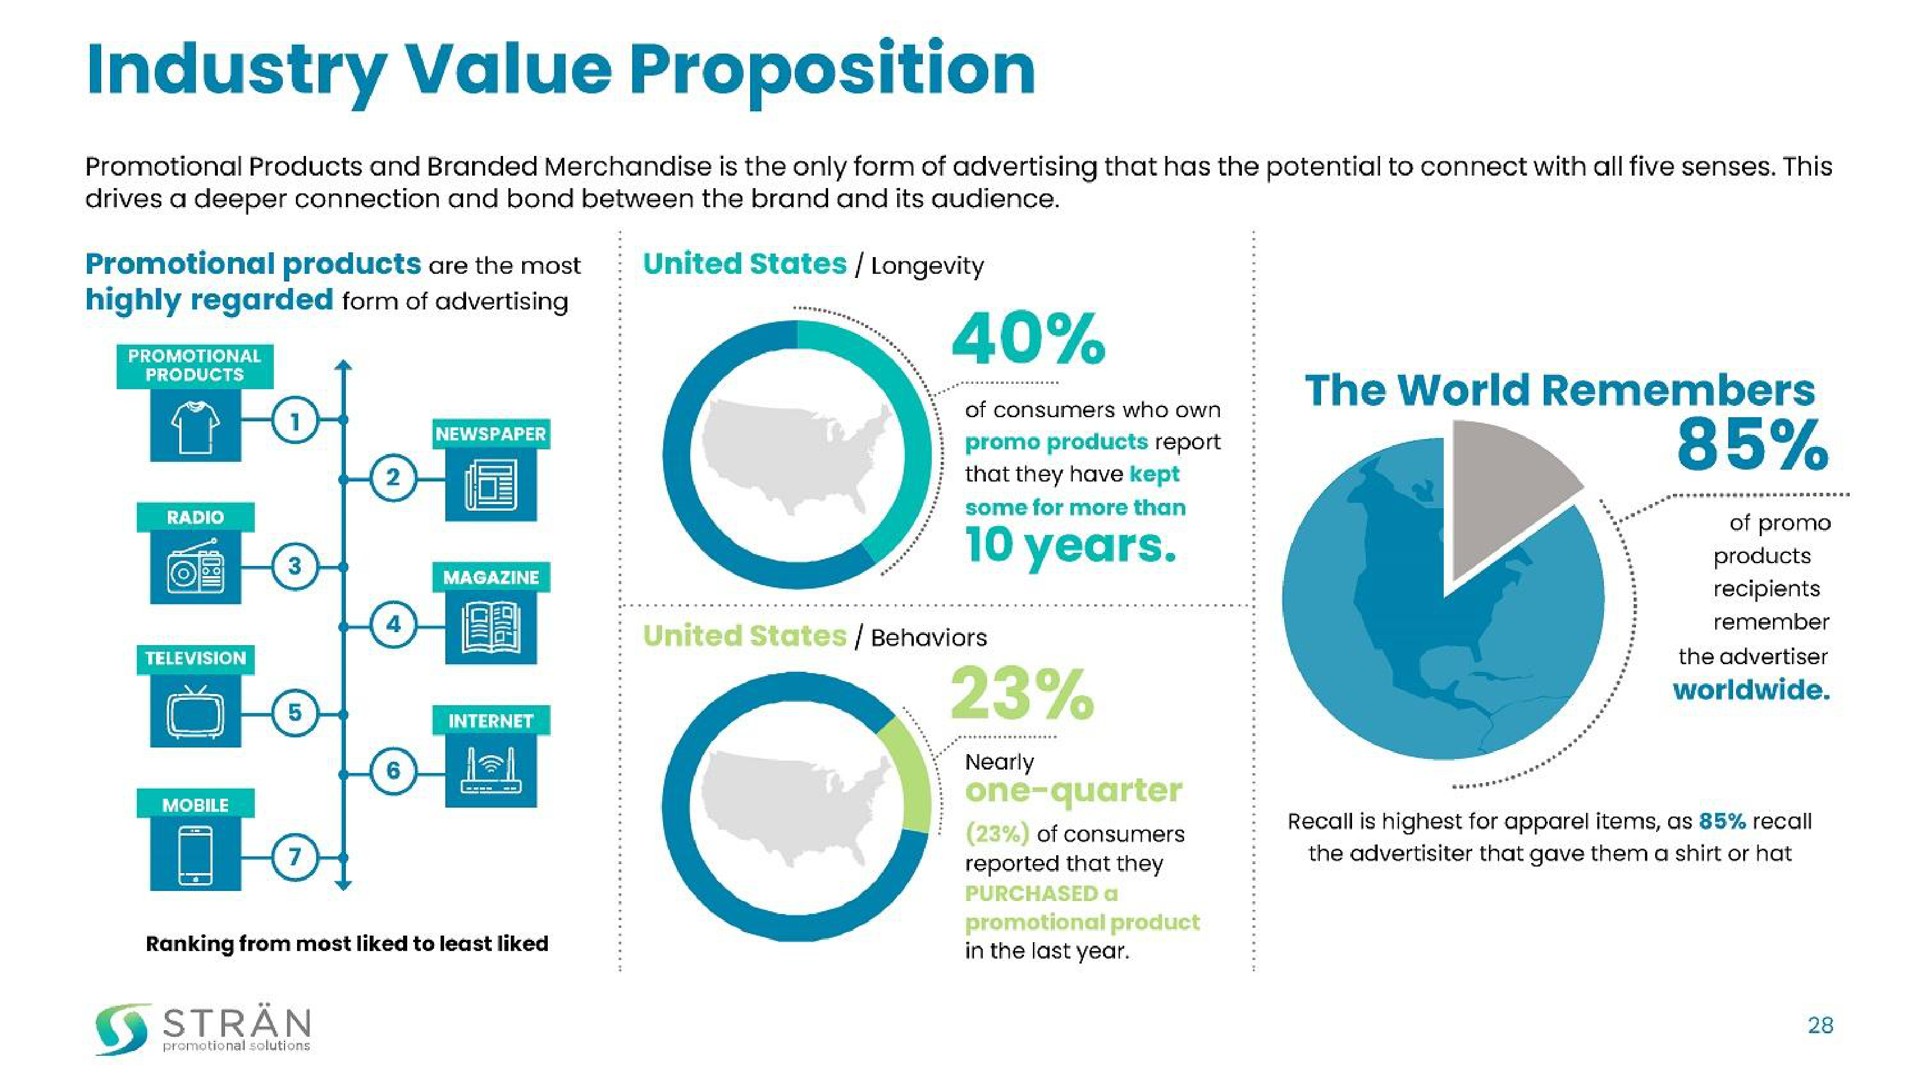 industry value proposition the world remembers | Stran & Company